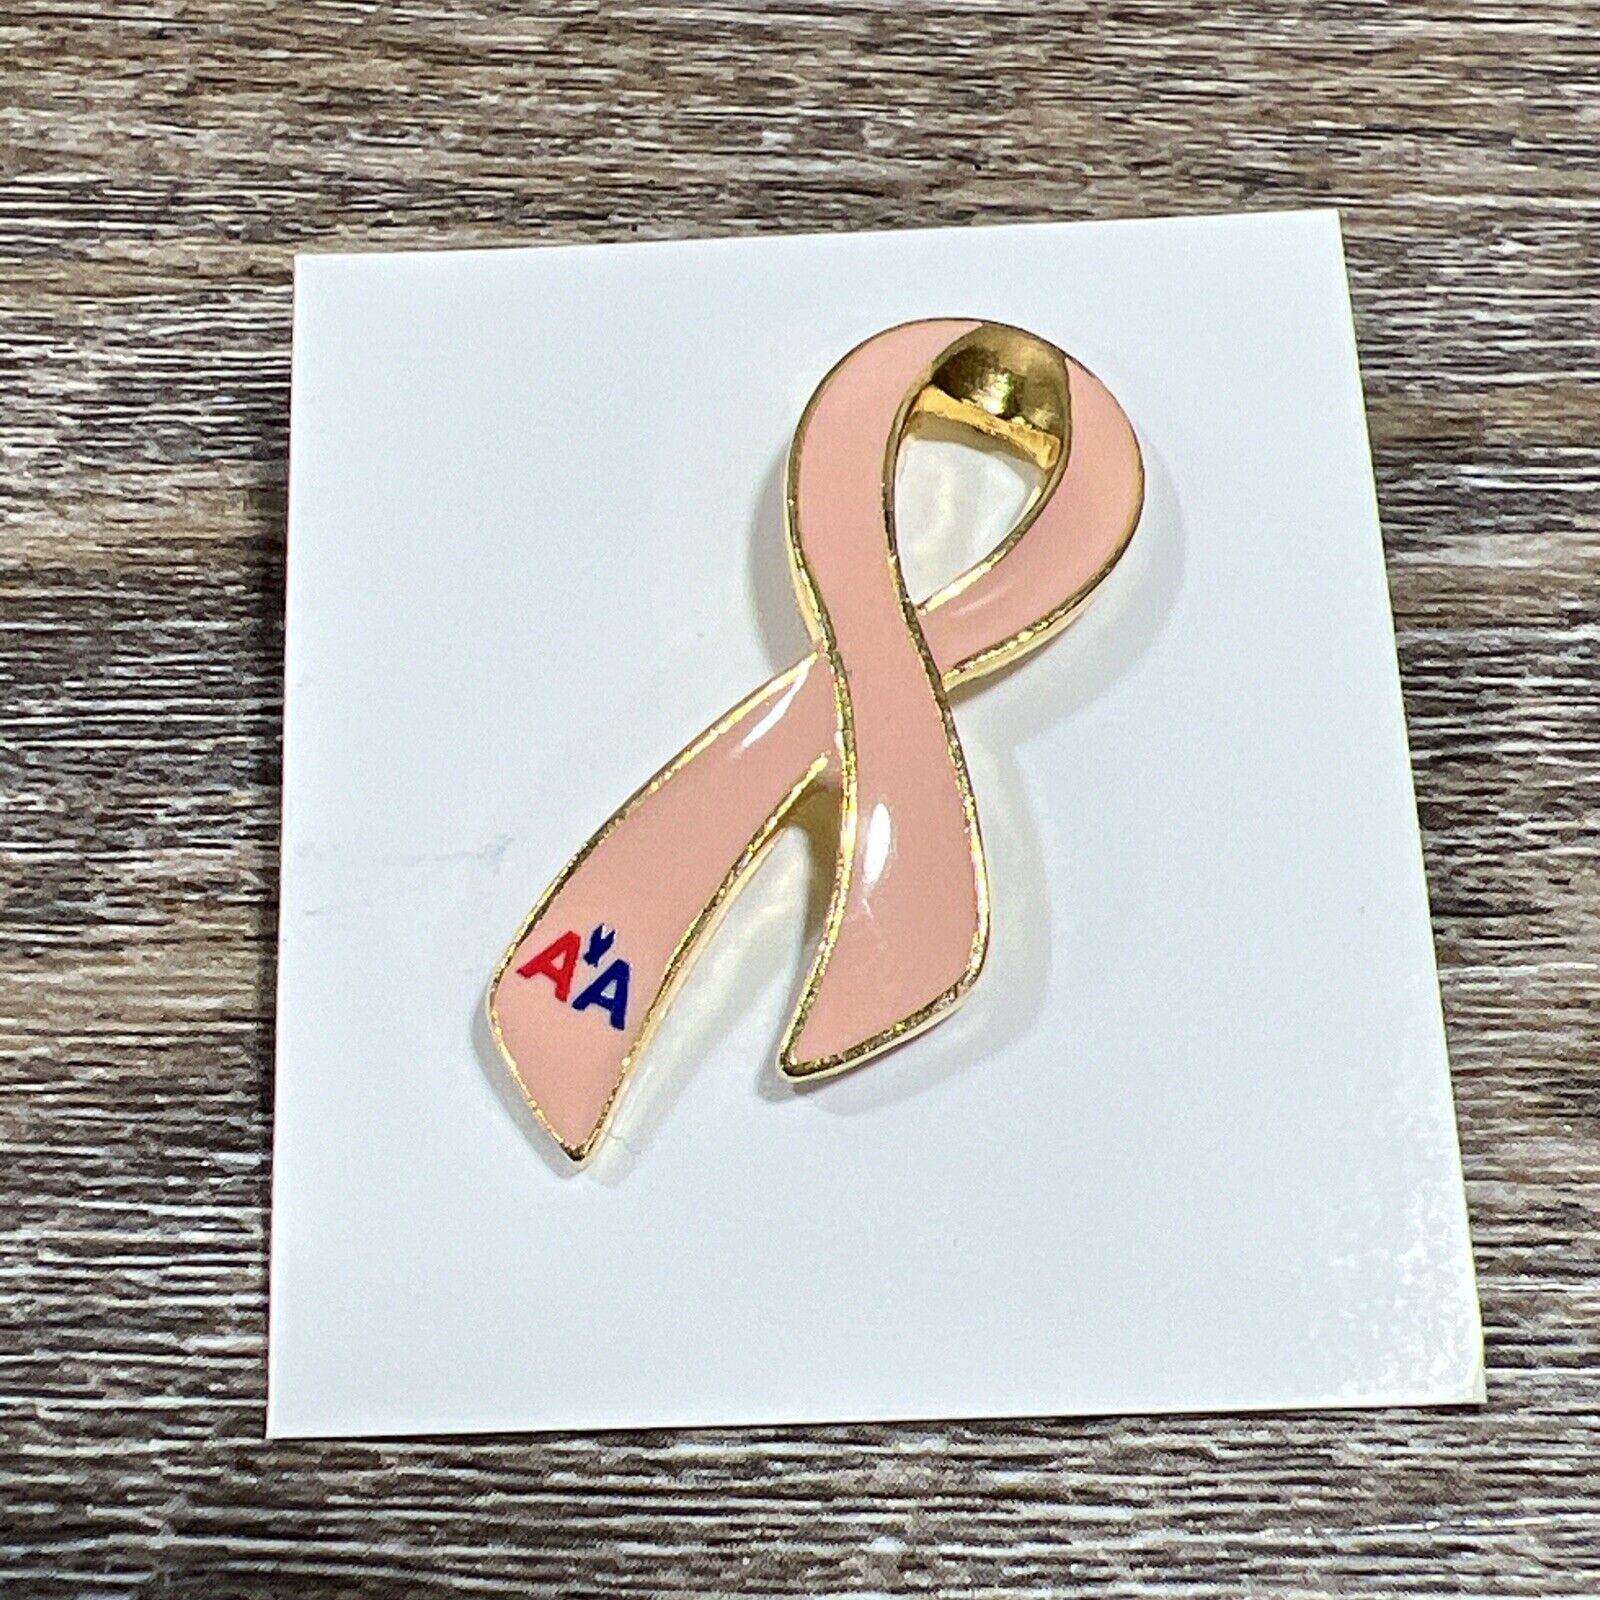 RARE VTG American Airlines Hat Lapel Pin Breast Cancer